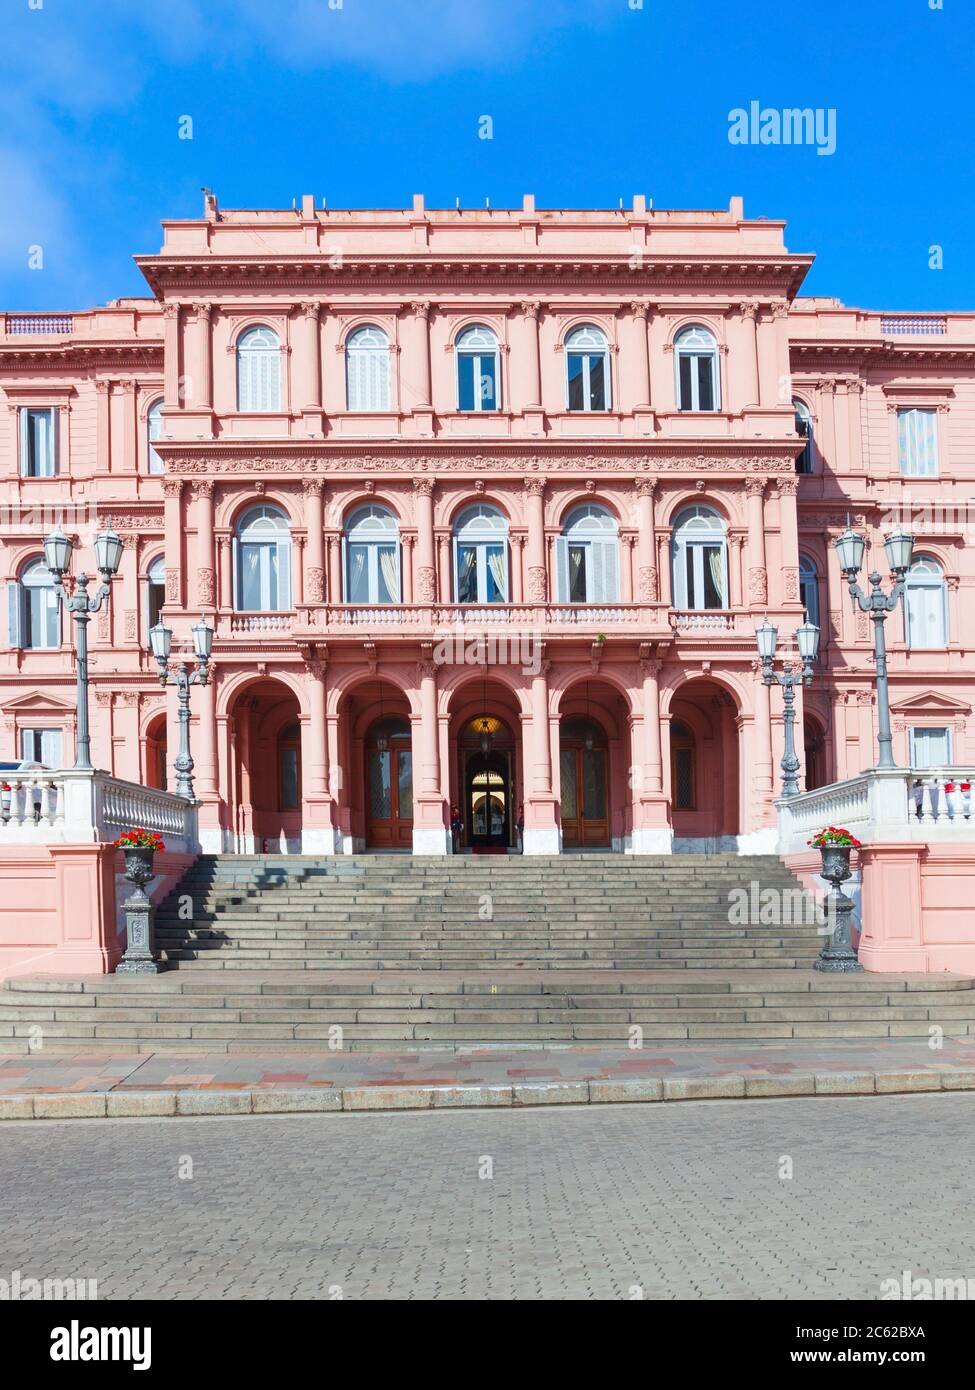 La Casa Rosada or The Pink House is the executive mansion and office of the President of Argentina, located in Buenos Aires, Argentina Stock Photo